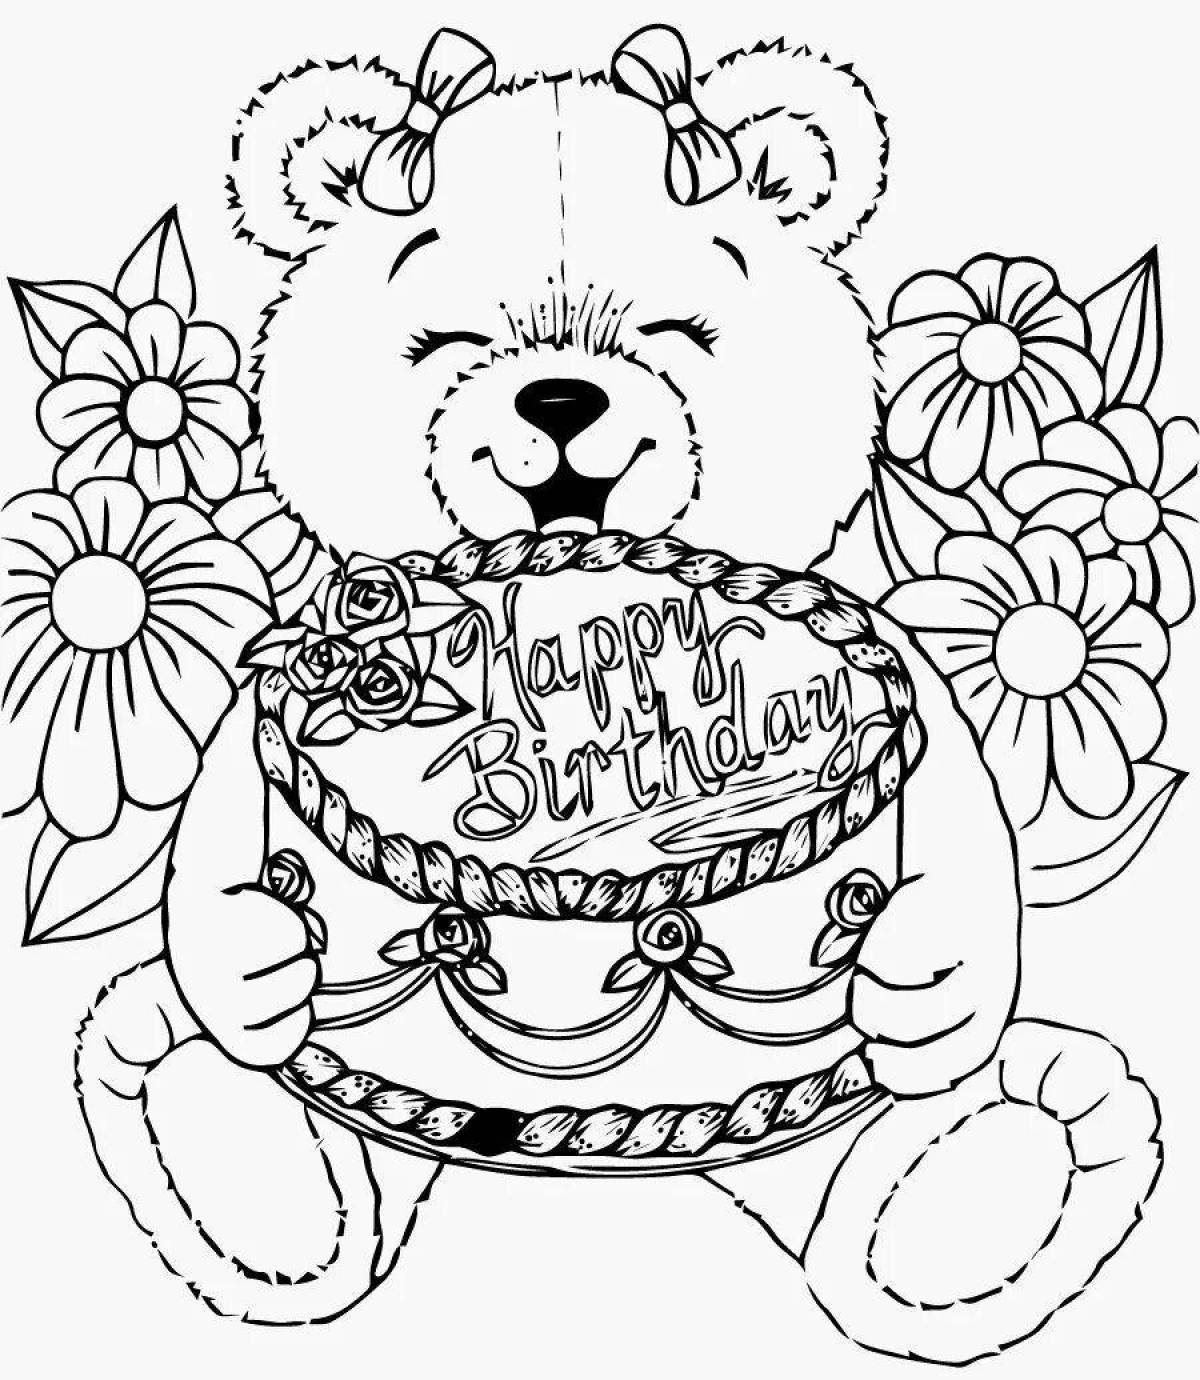 Exquisite coloring card